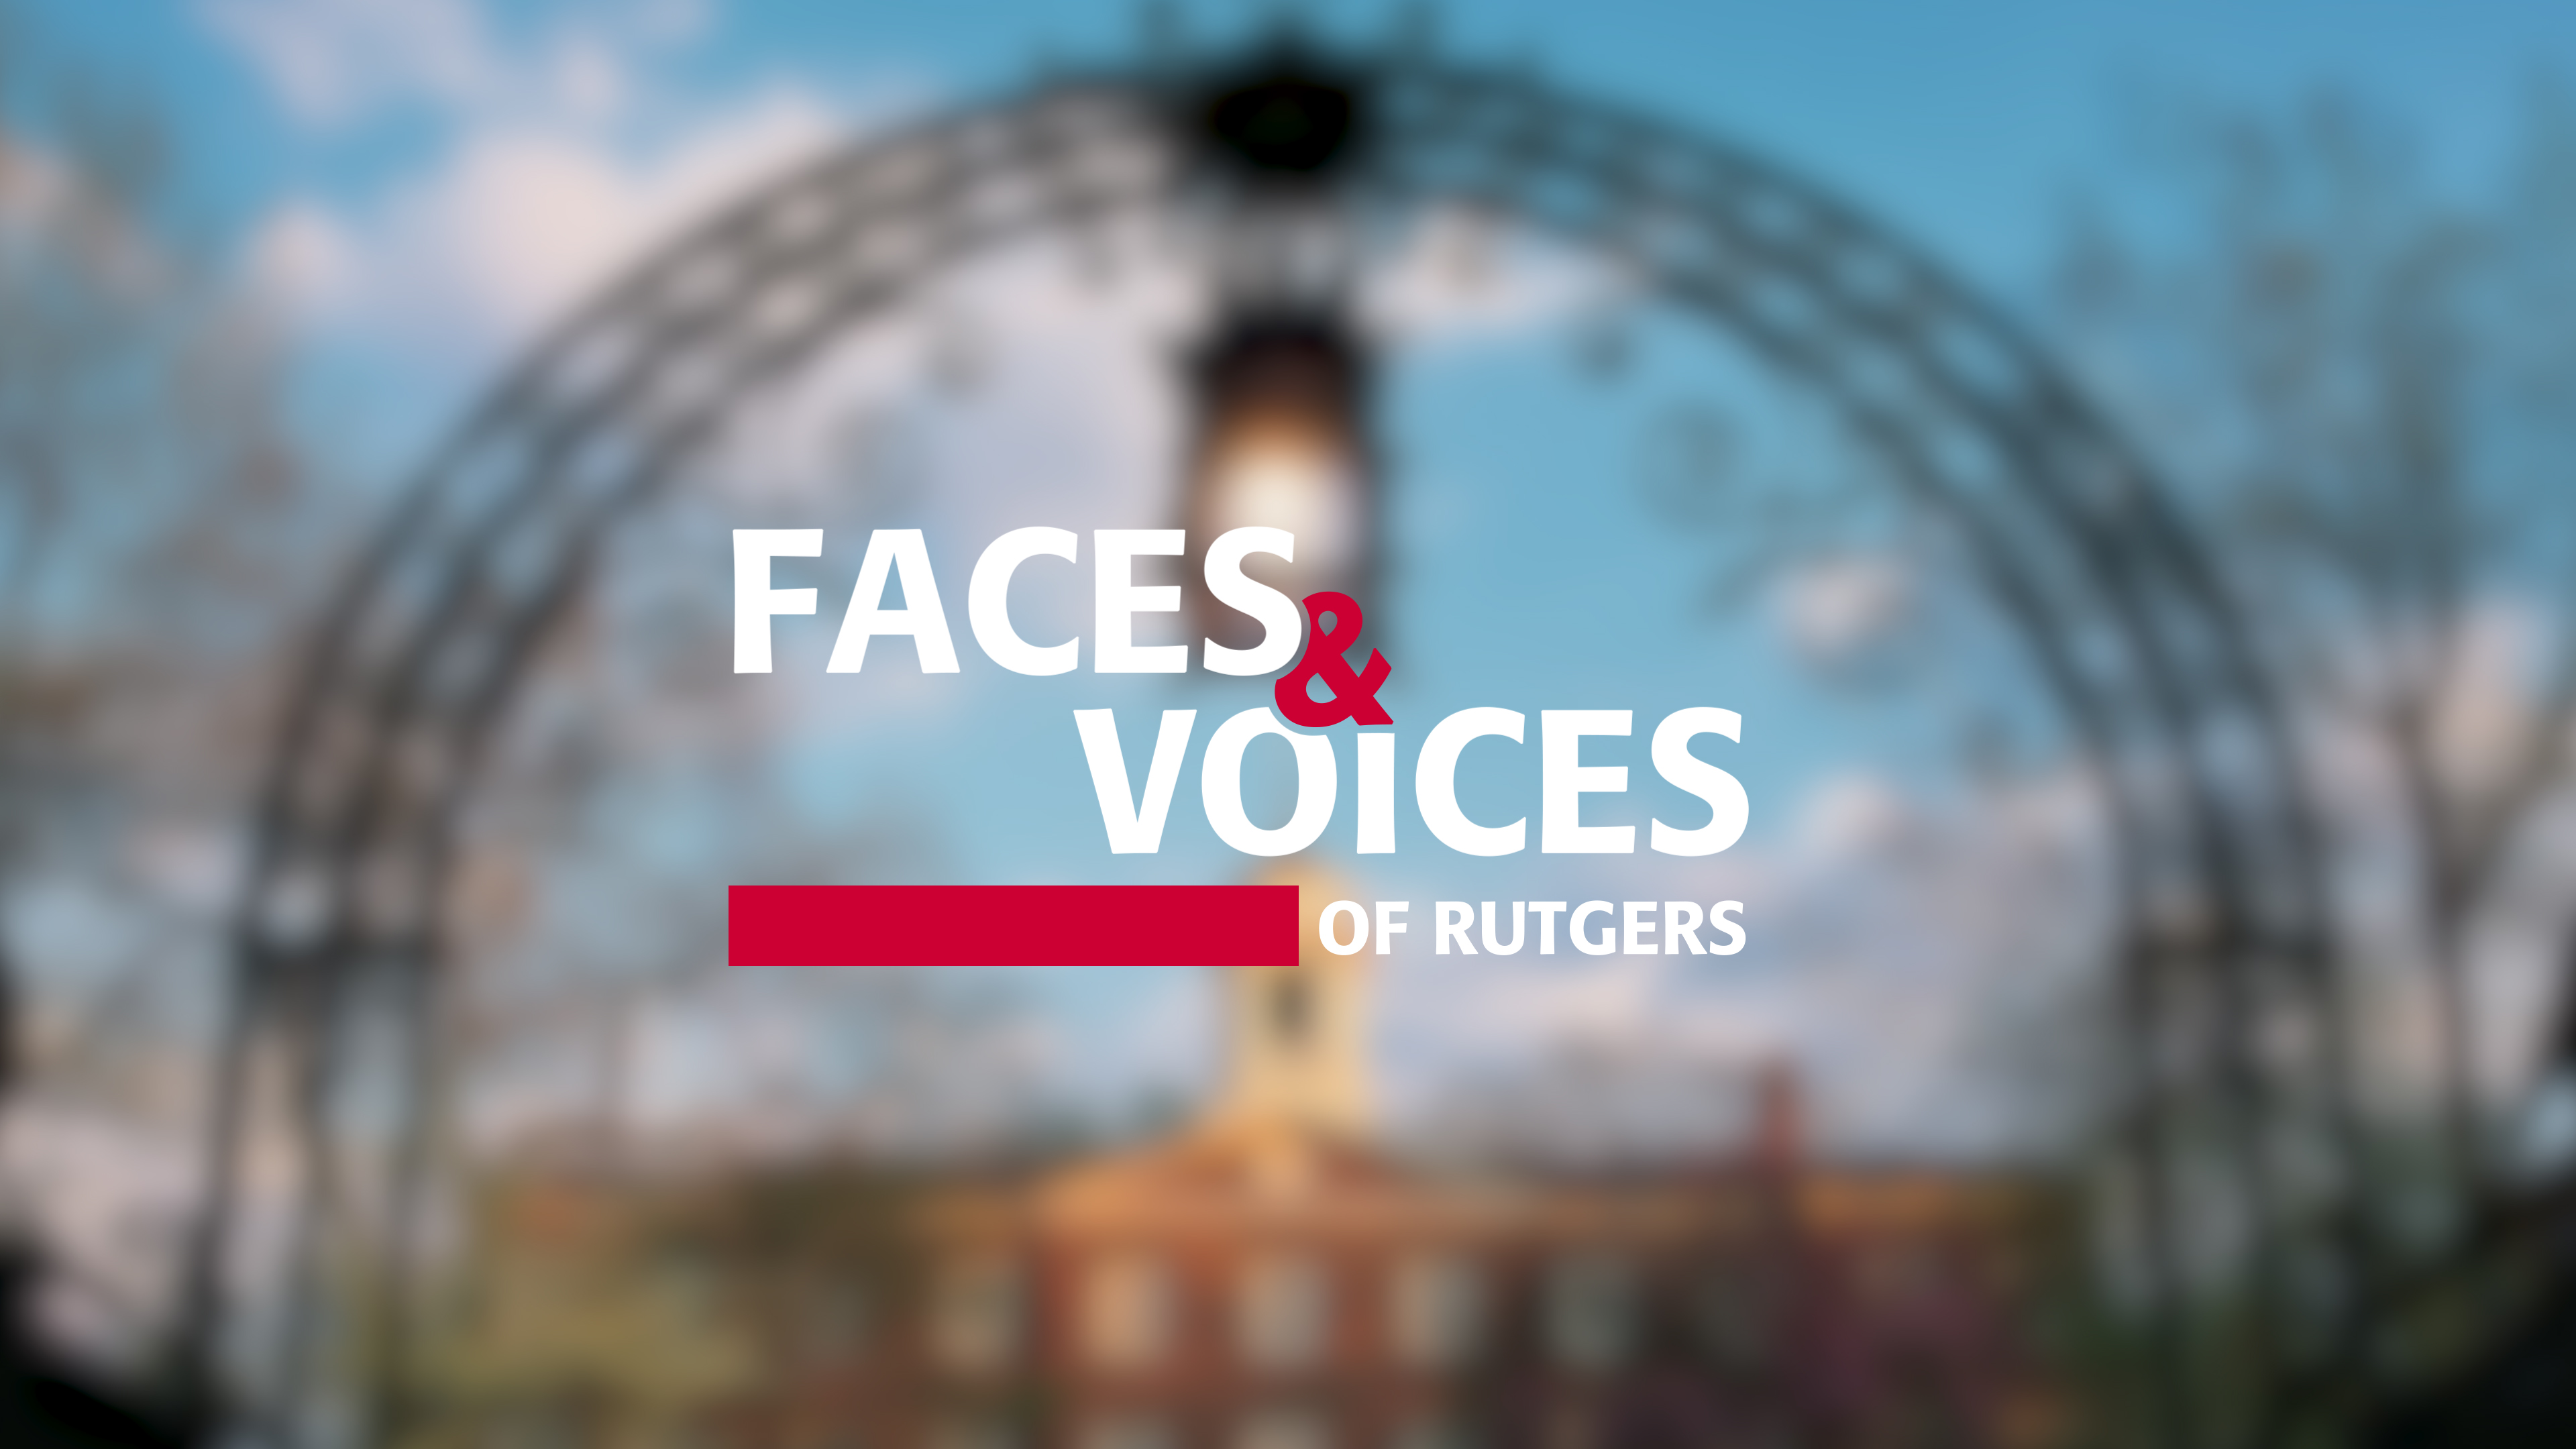 Title screen for the Faces & Voices of Rutgers video series